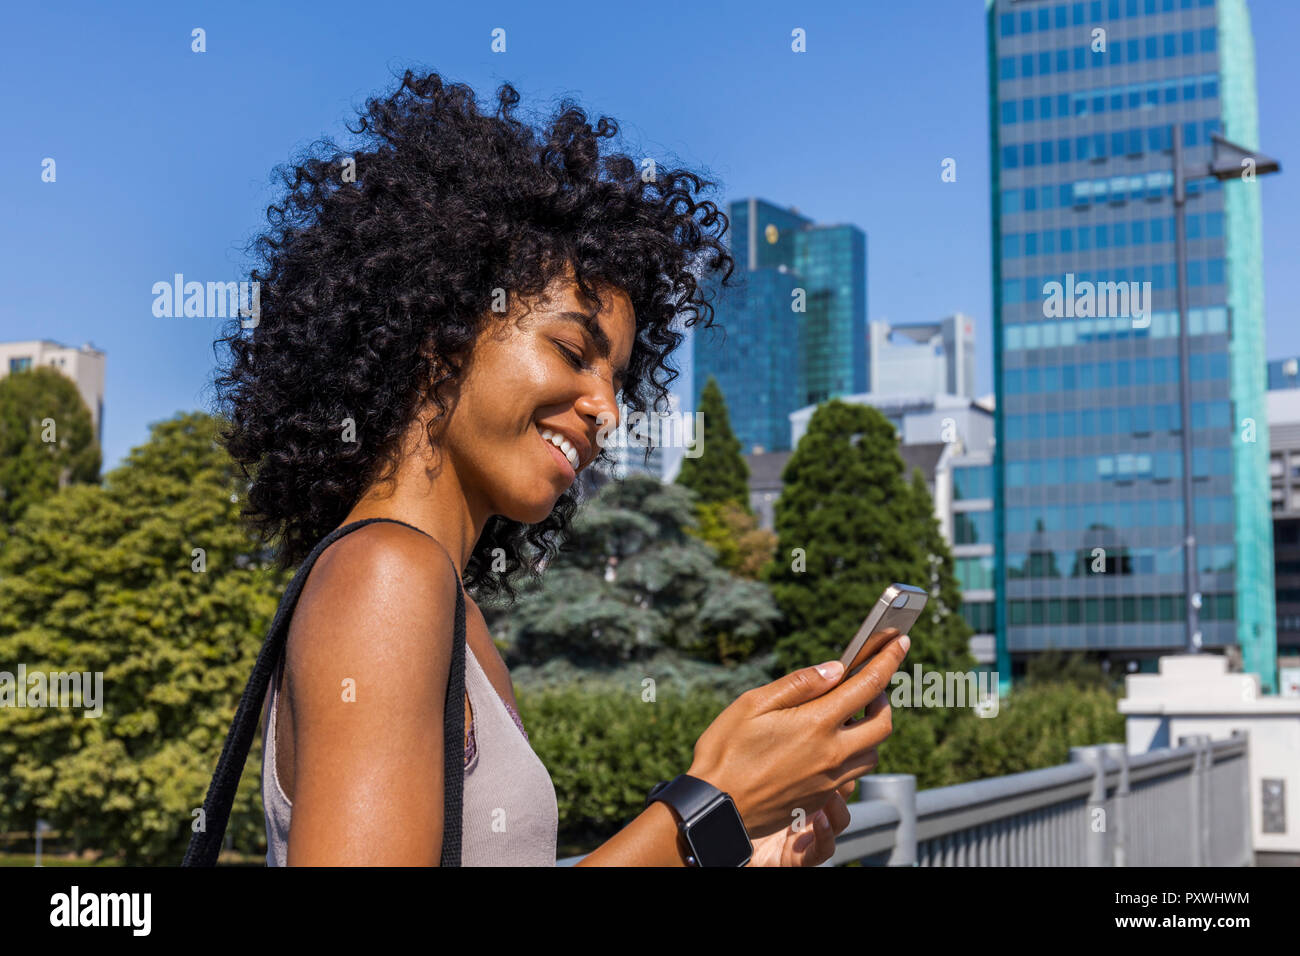 Germany, Frankfurt, smiling young woman with curly hair looking at cell phone Stock Photo